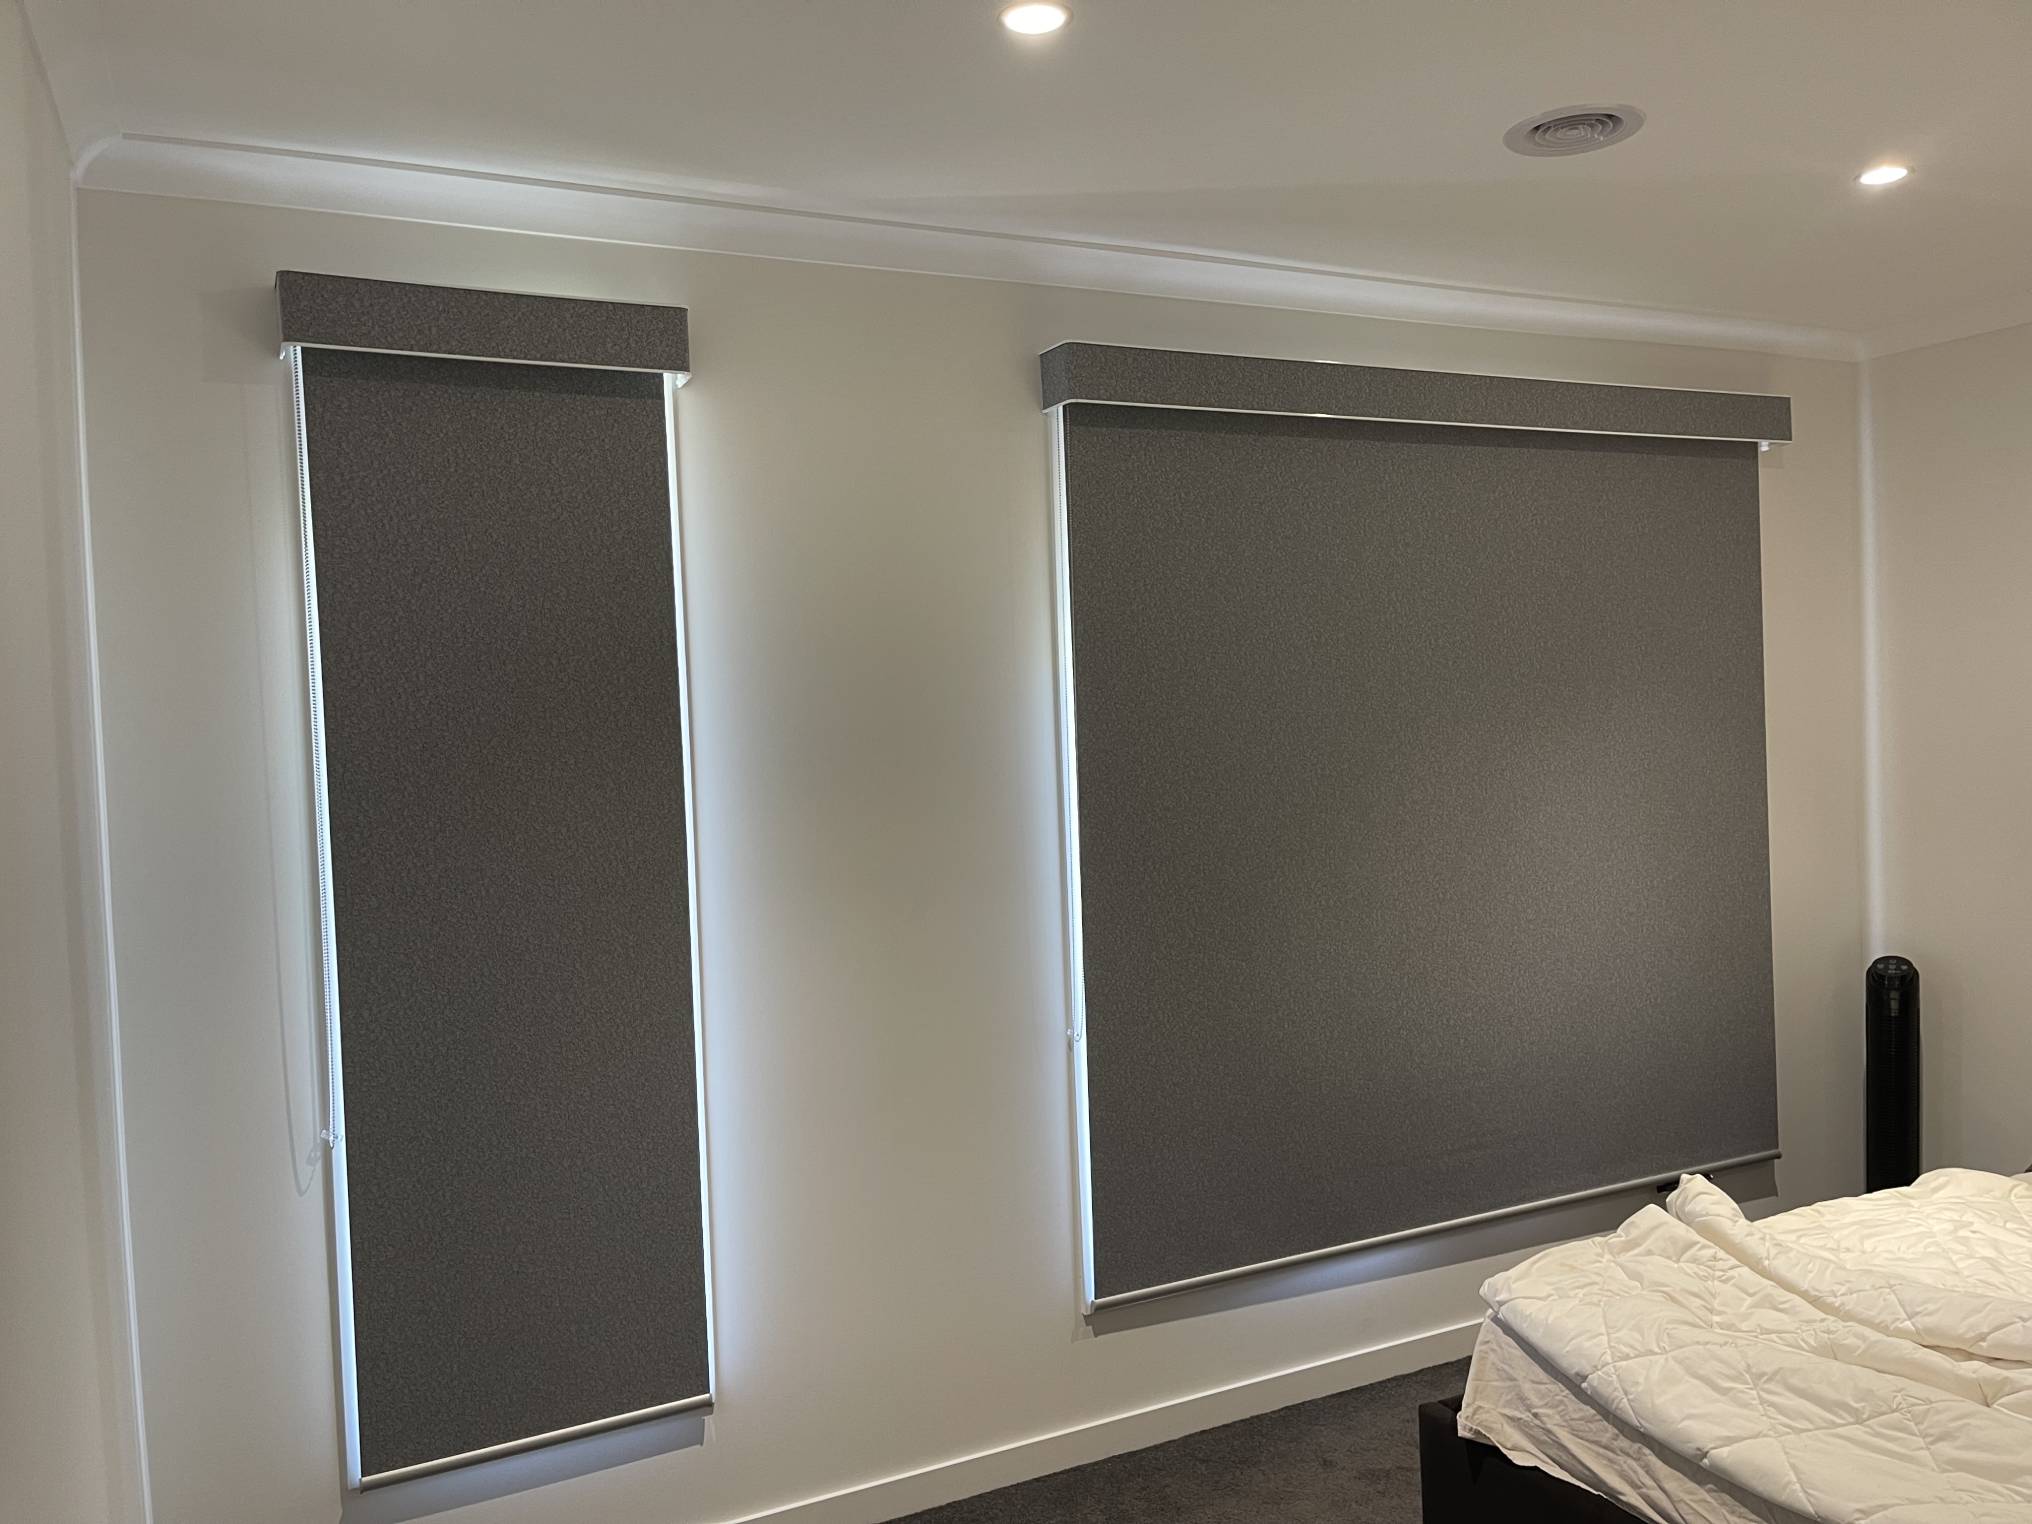 Straight drop Blinds - Cost Details